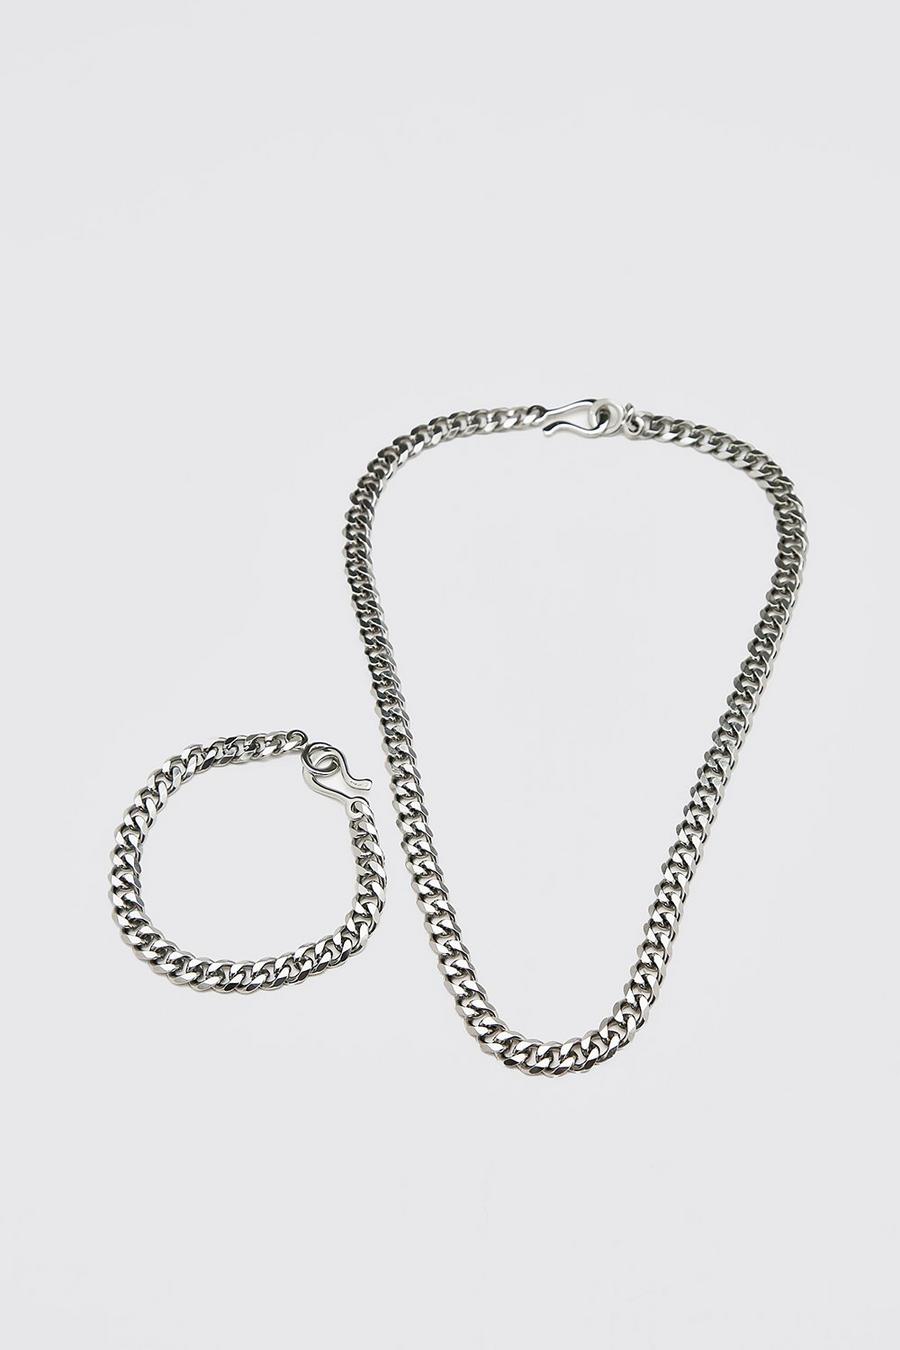 Just add a chain on it! Our new chunky chain comes in silver and